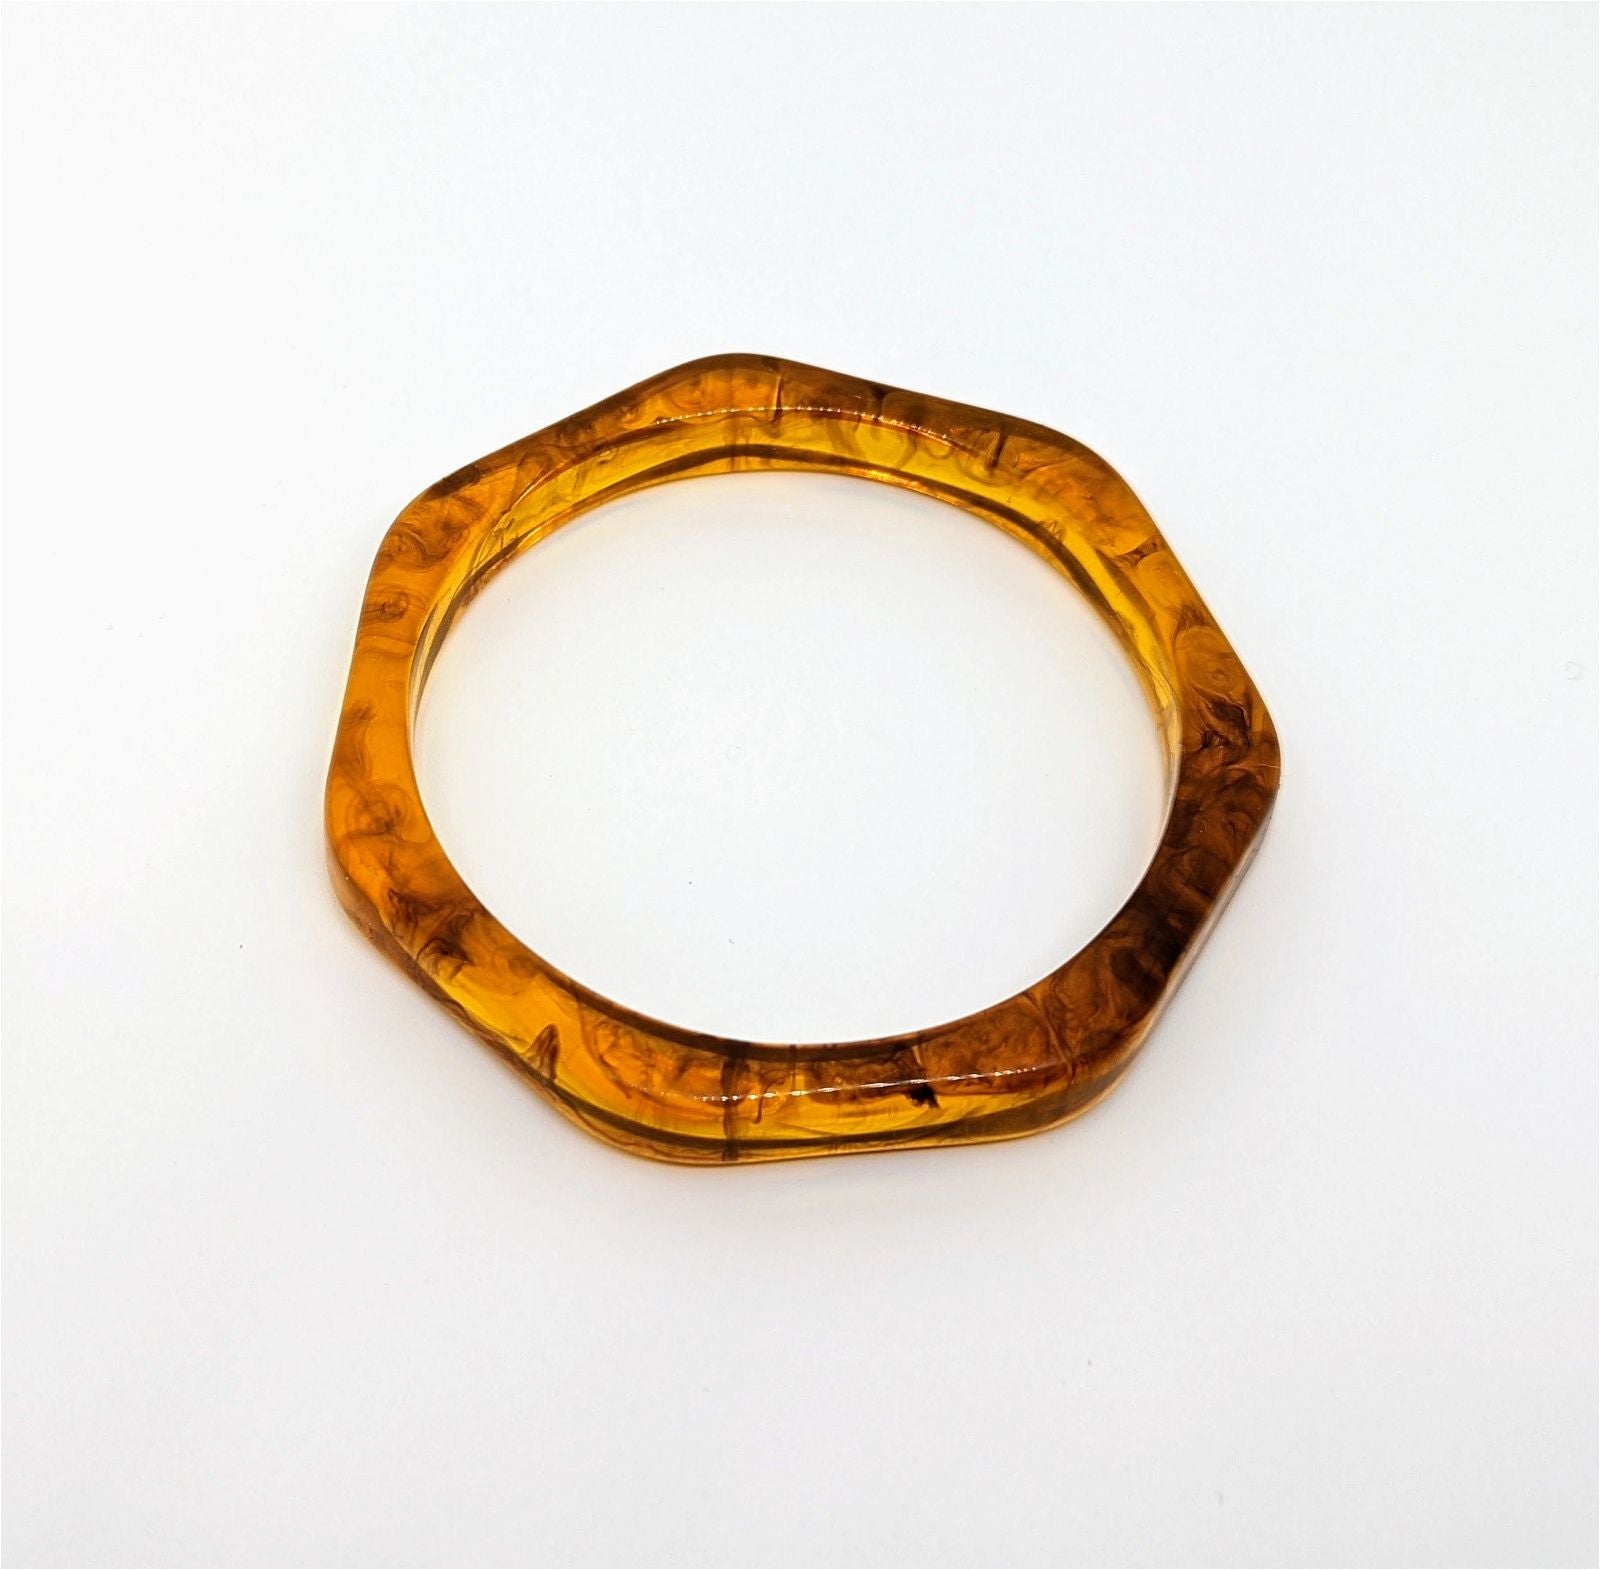 Resin Bangles - Maily's Classic Accessories